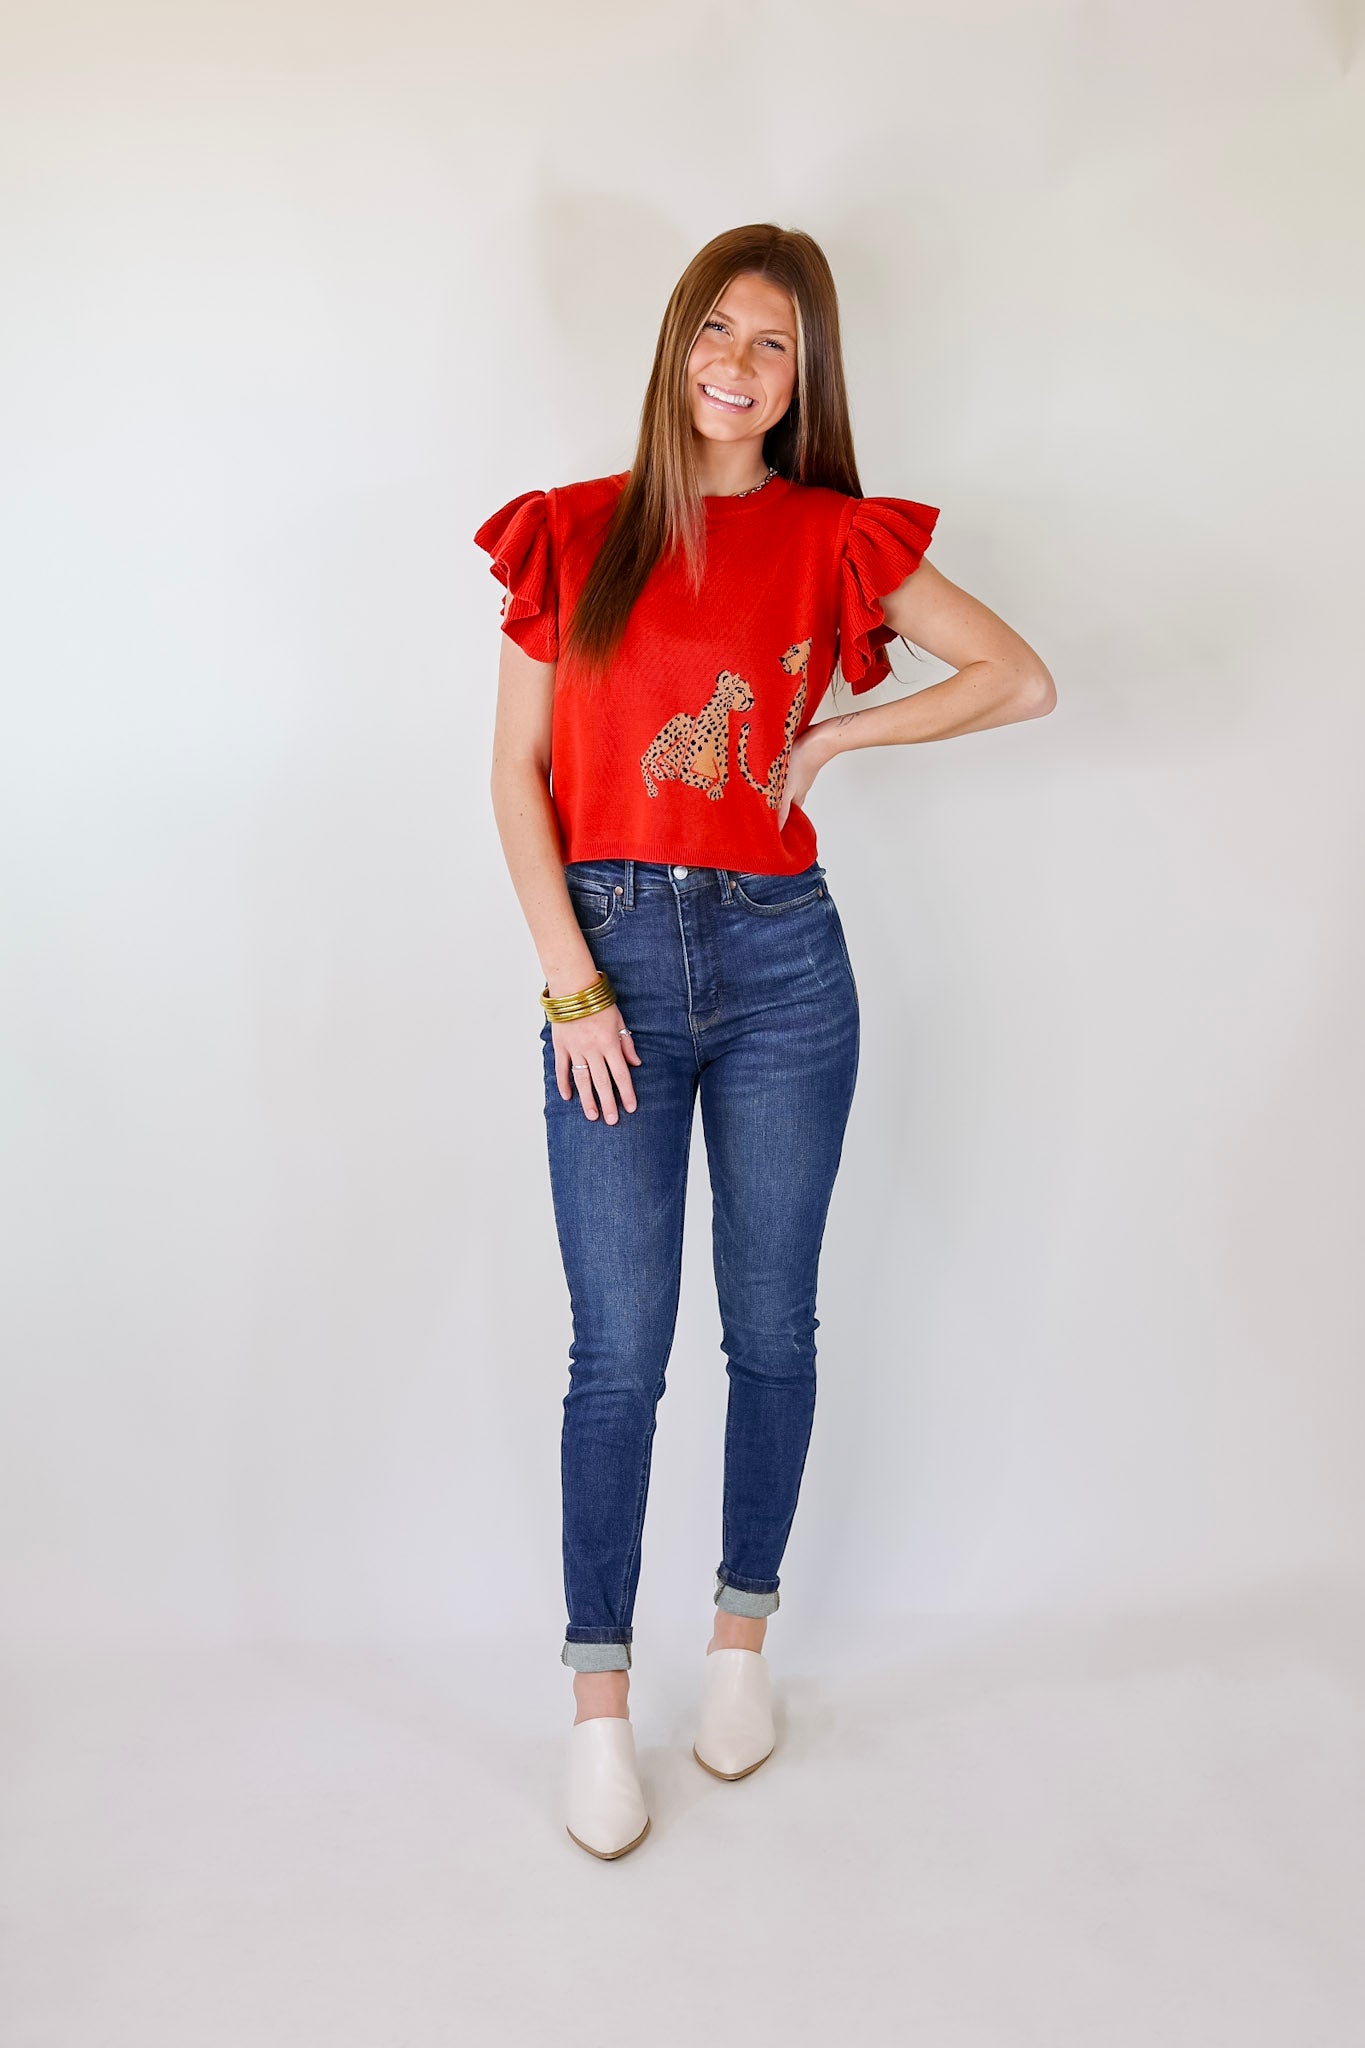 Talk This Way Cheetah Print Sweater Top with Ruffle Cap Sleeves in Red - Giddy Up Glamour Boutique